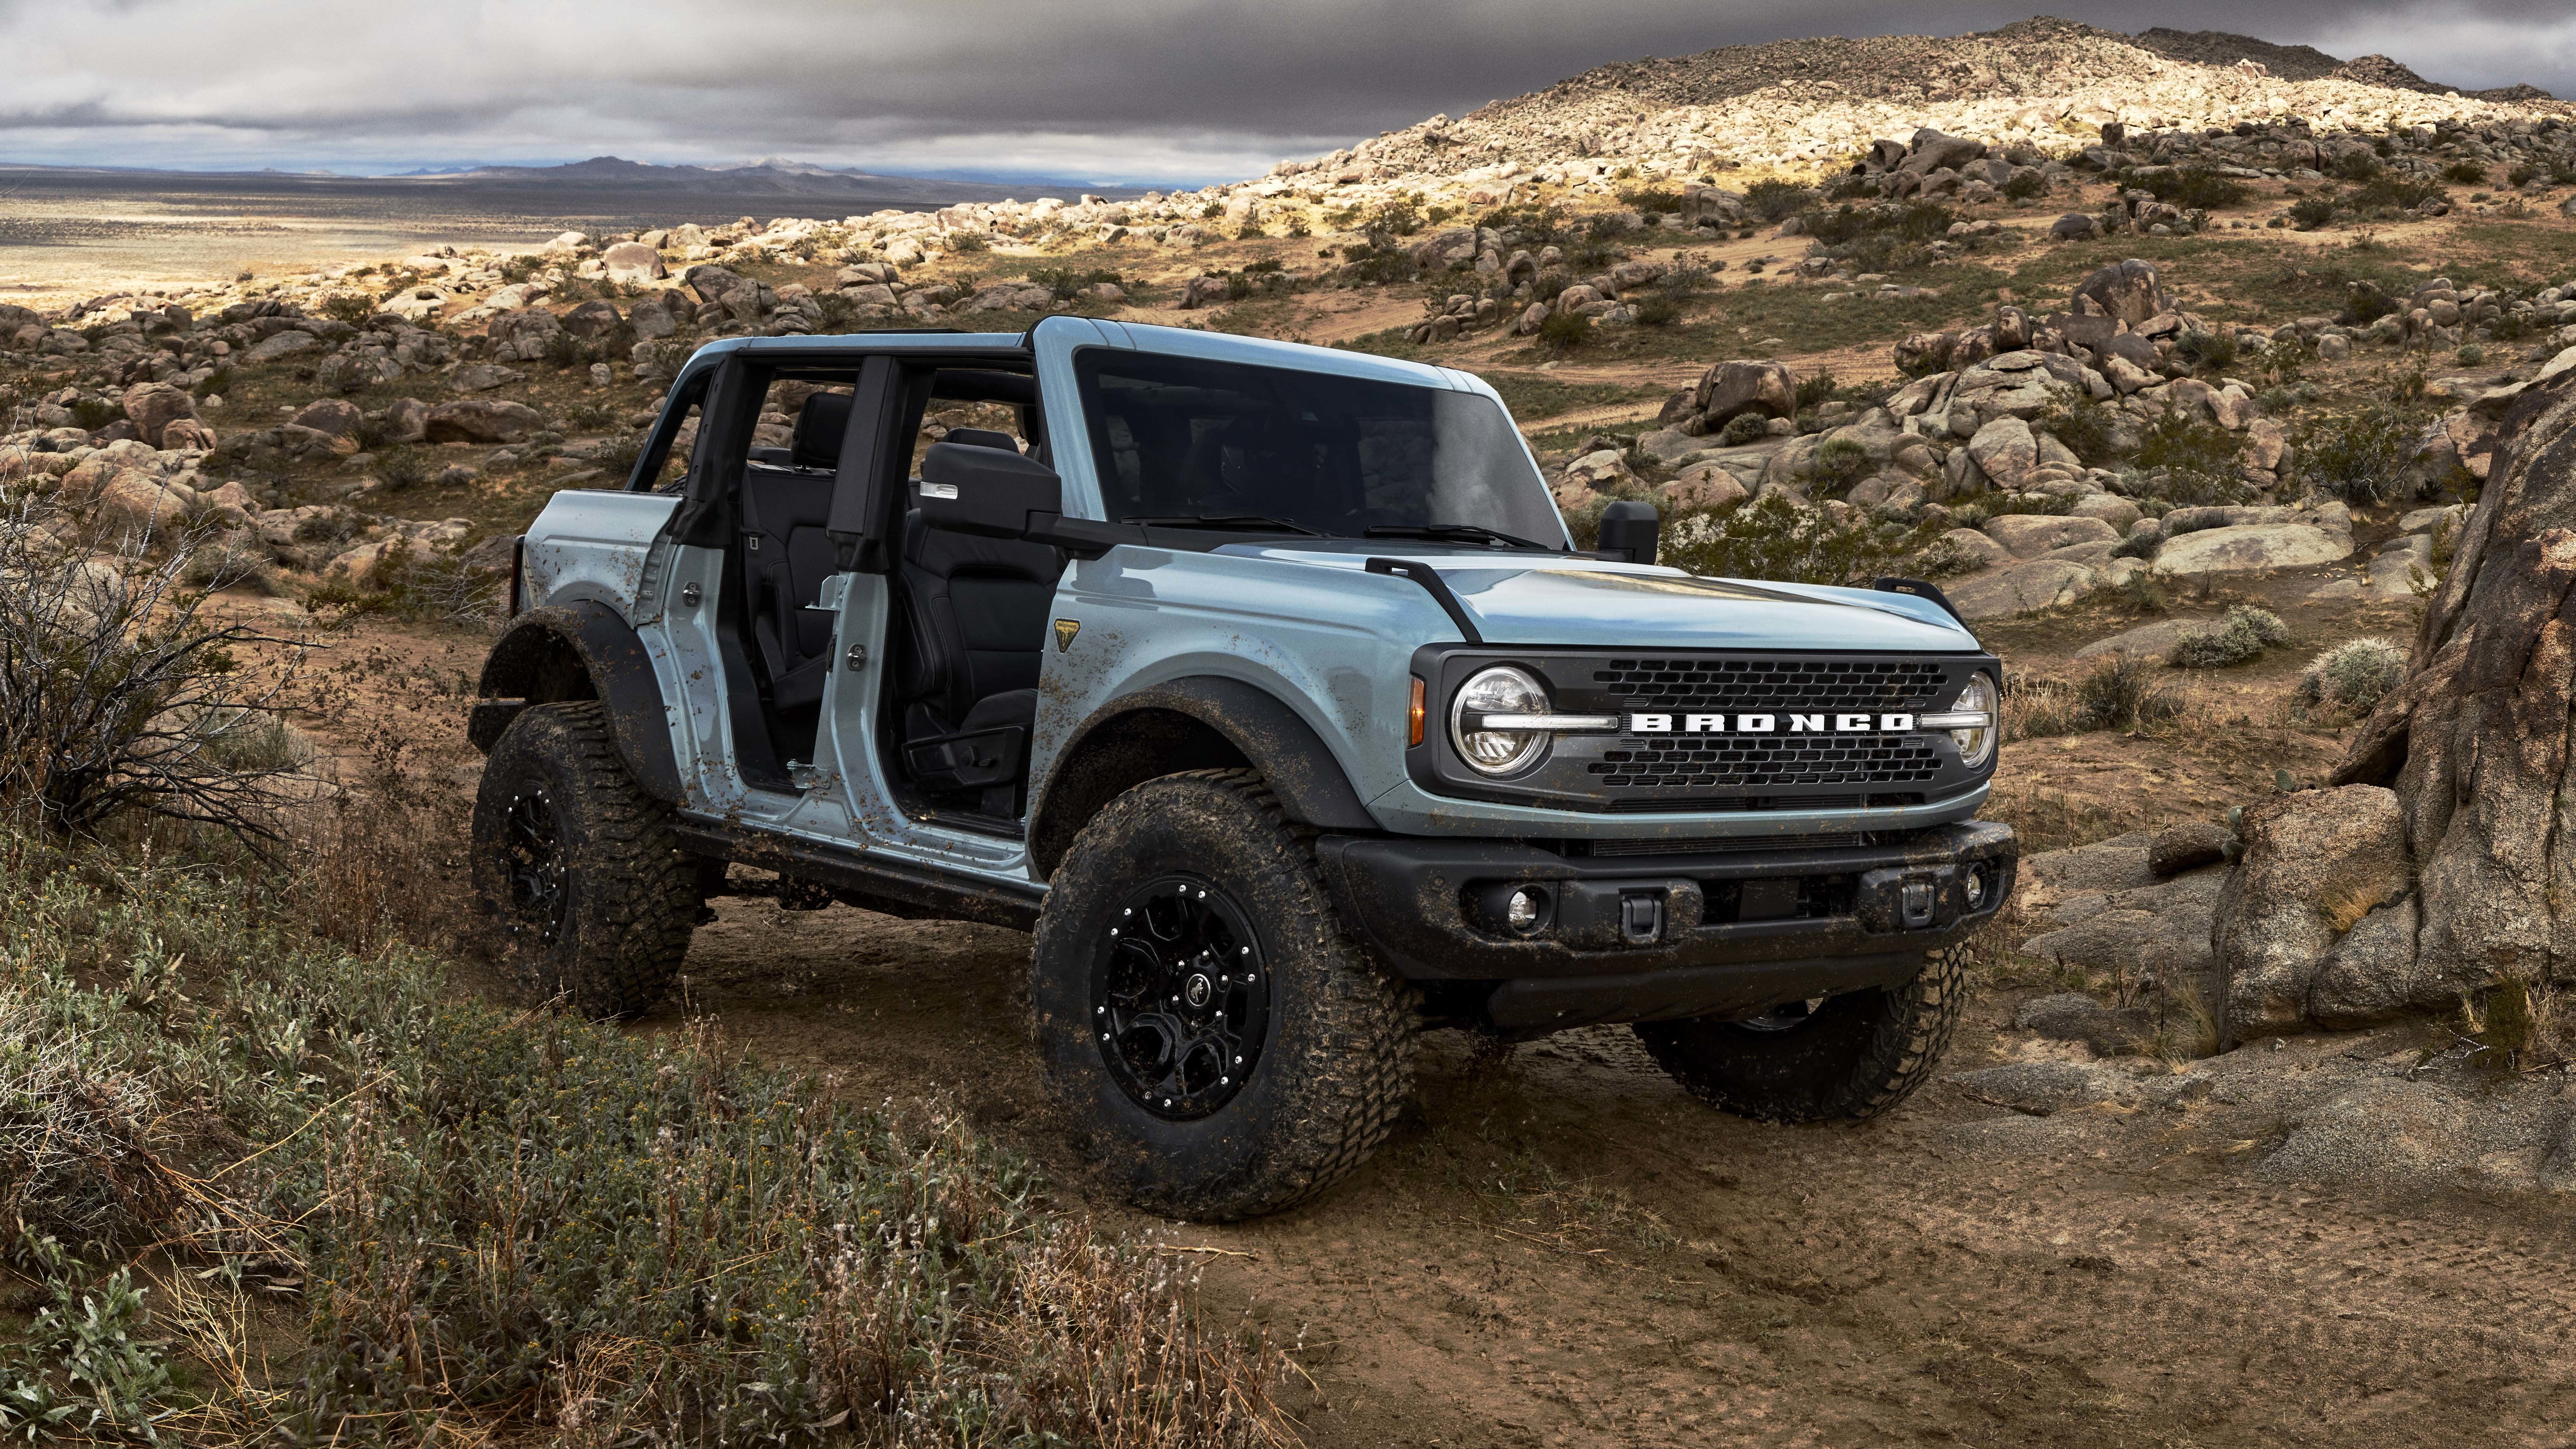 Ford Bronco revealed: Specs, features, performance, off